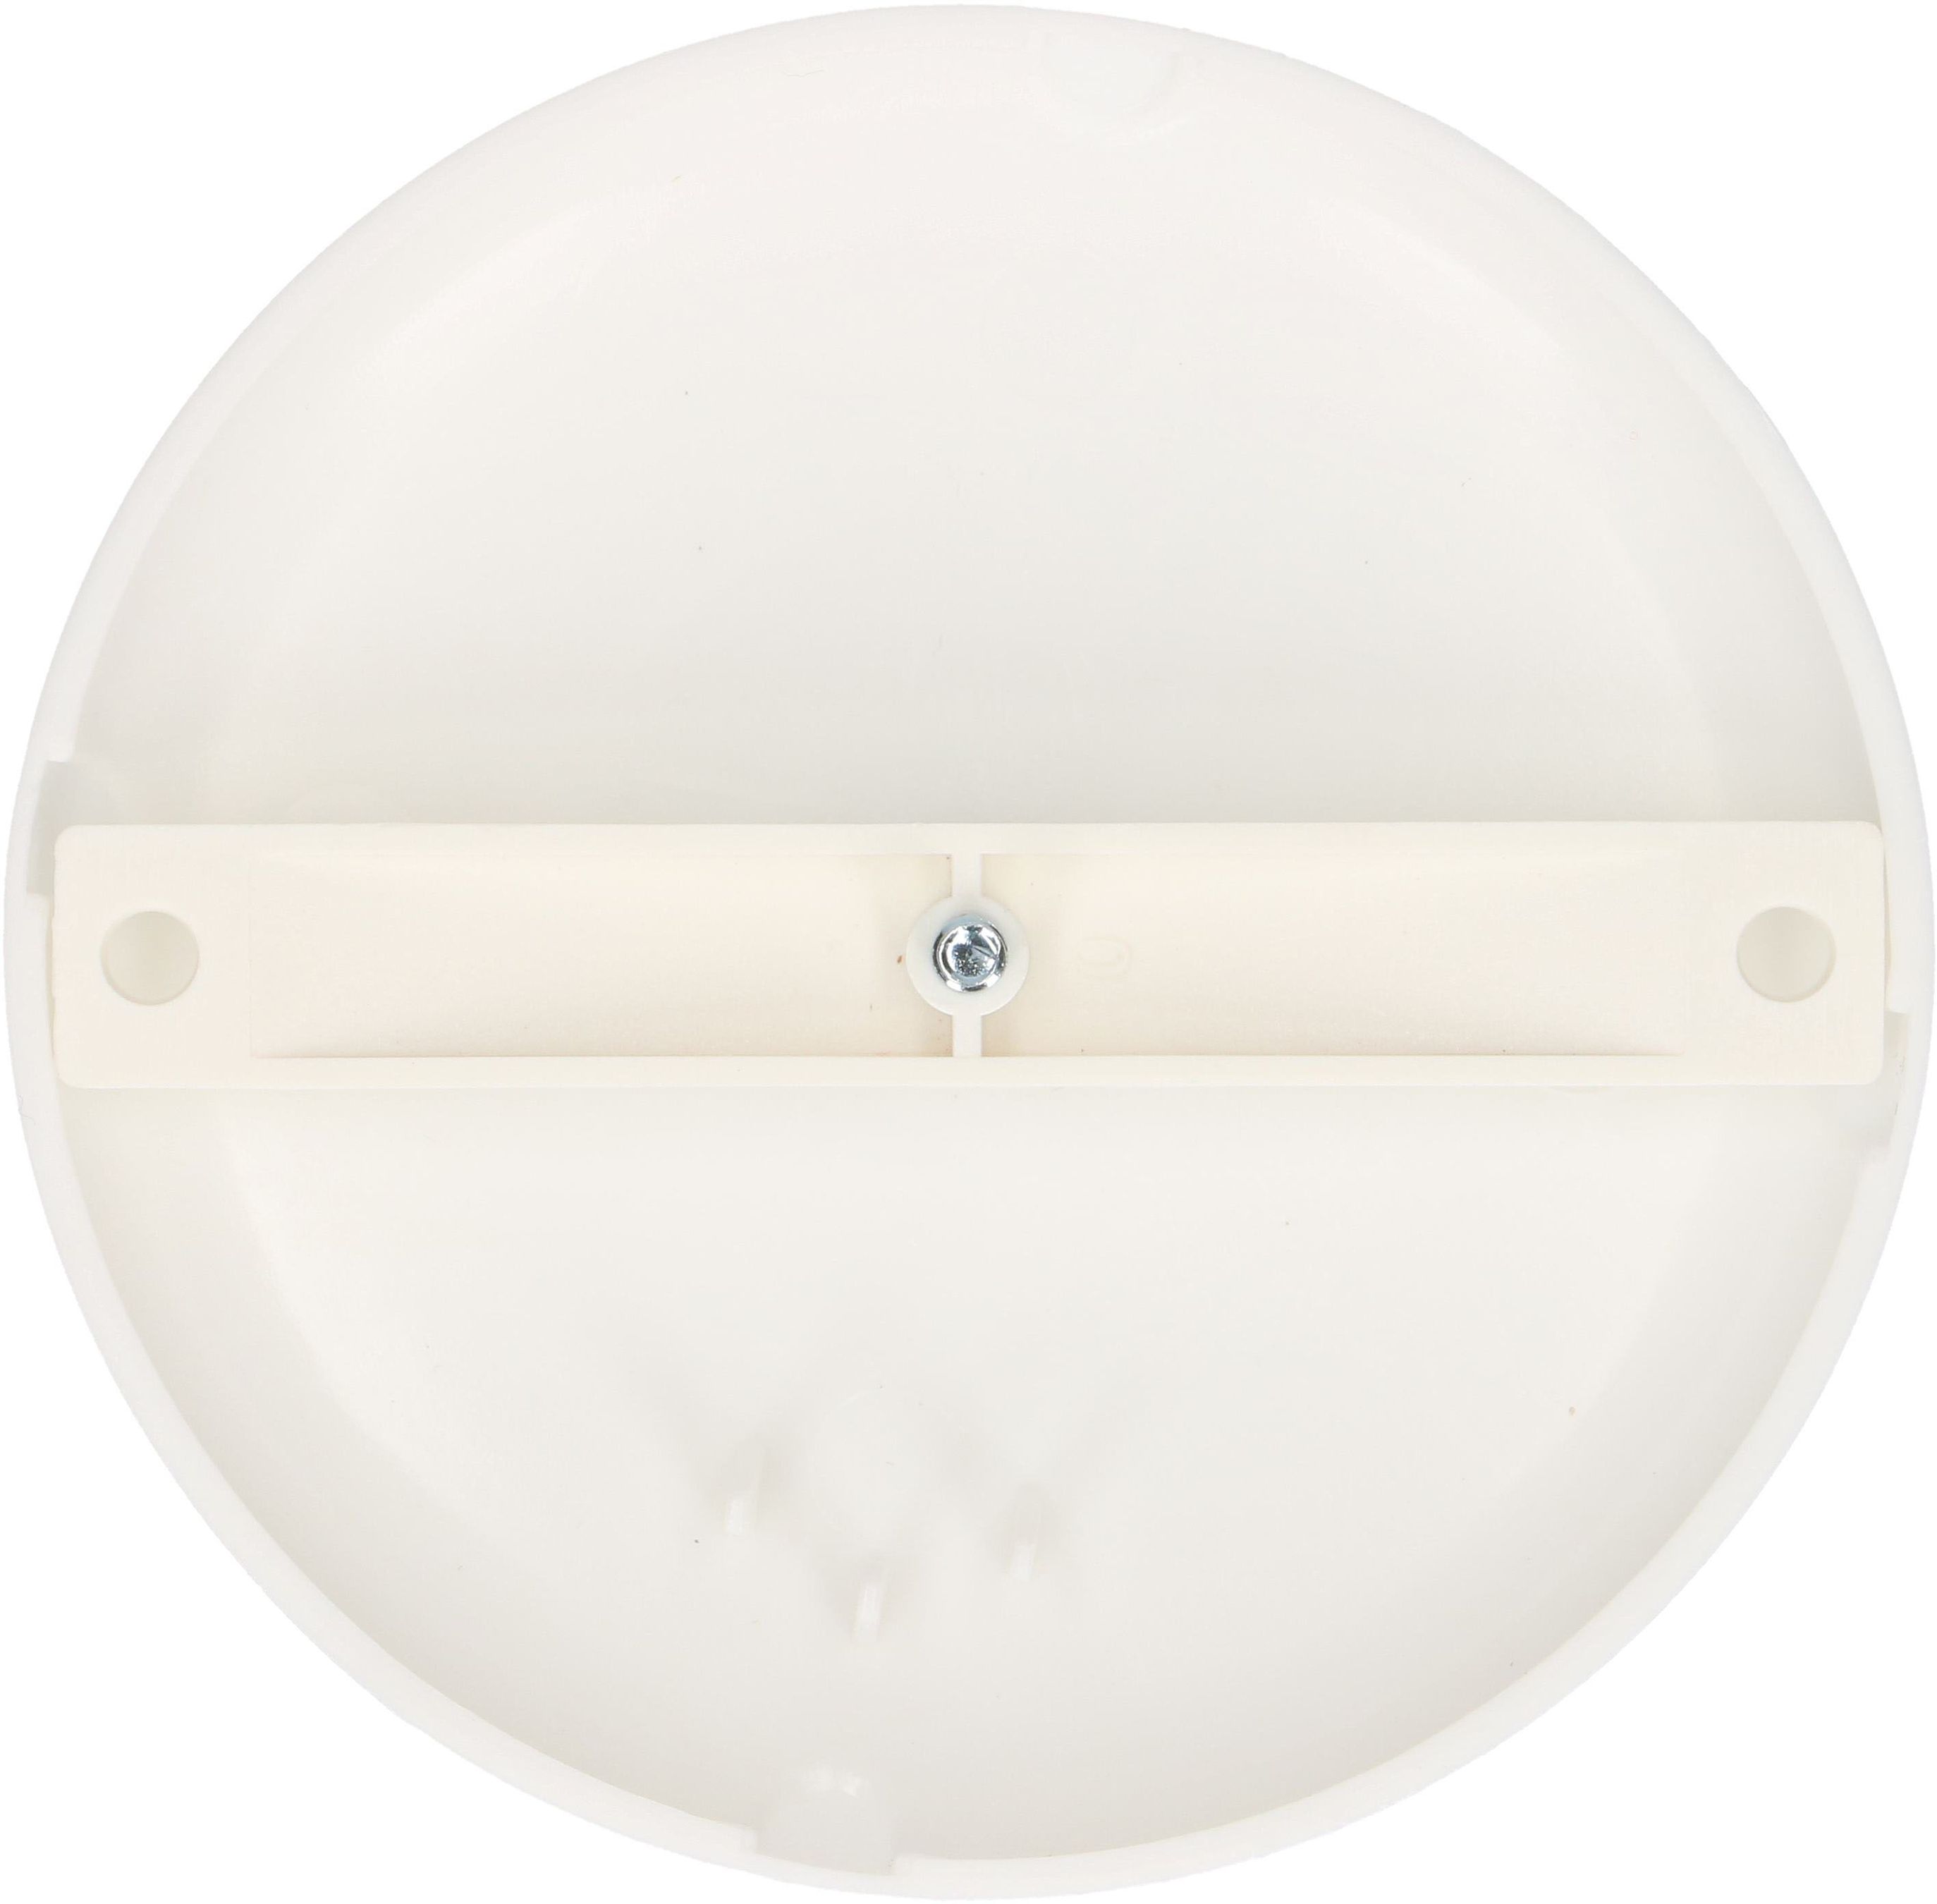 Ceiling cover dia. 95mm white